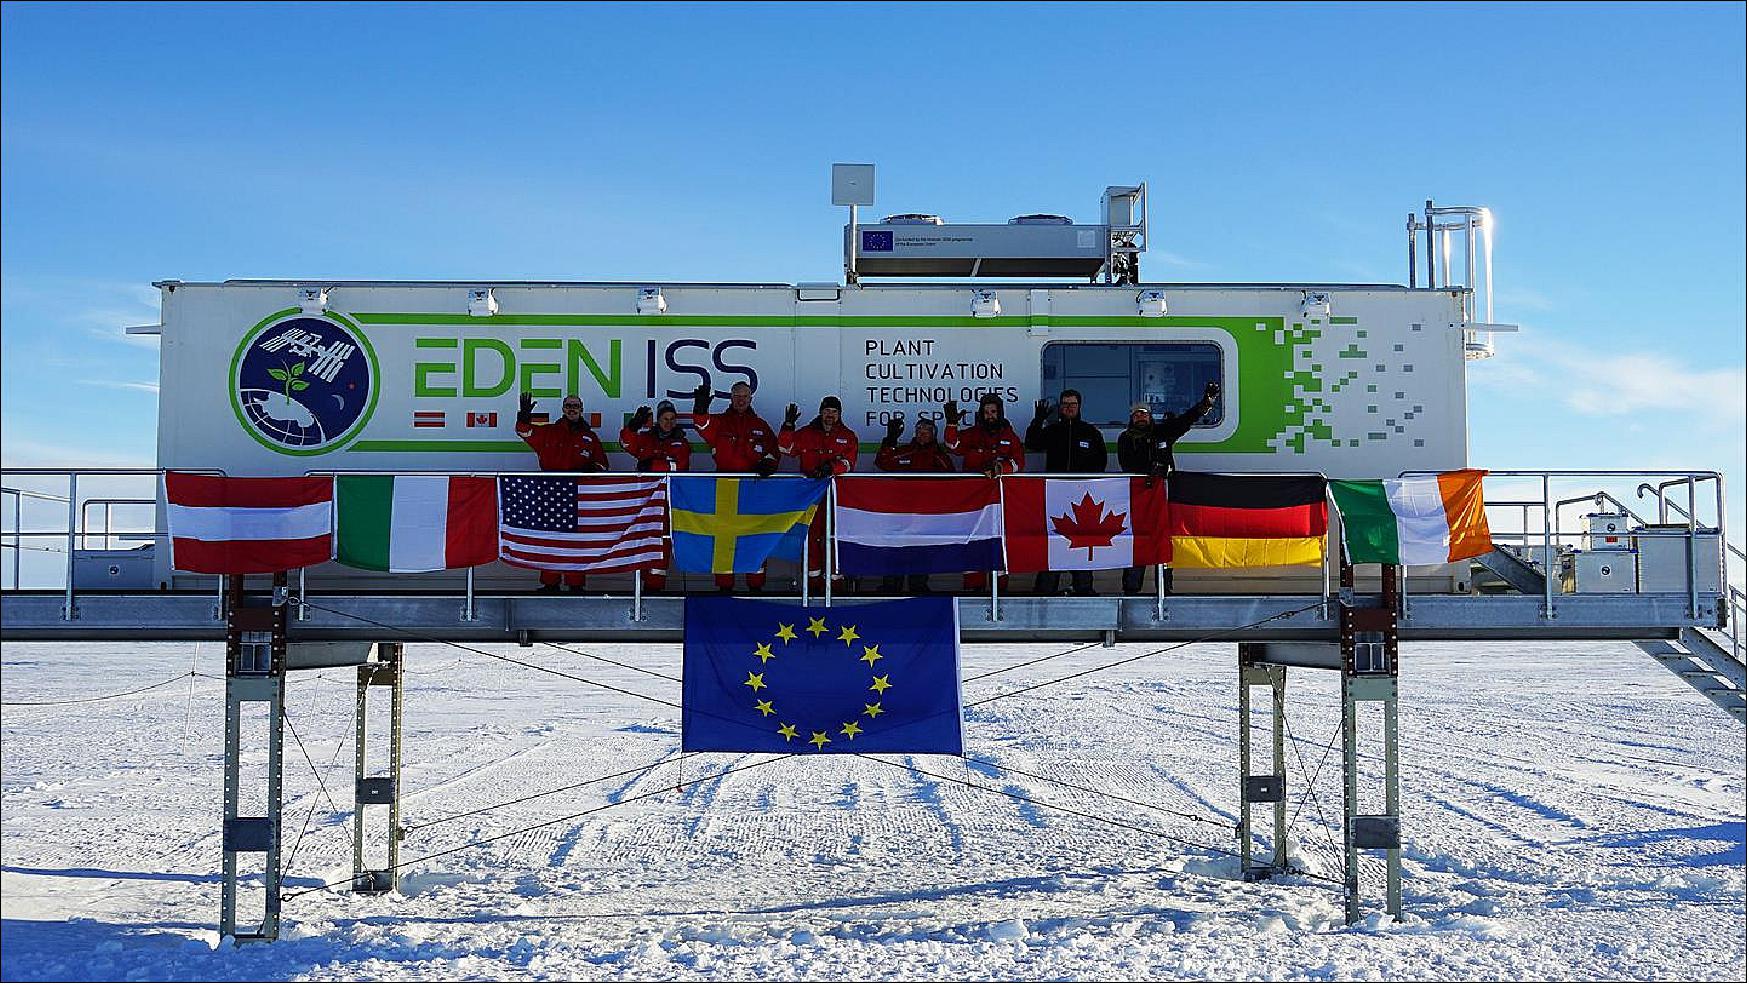 Figure 25: The EDEN ISS construction team says good bye to Antarctica (image credit: DLR)